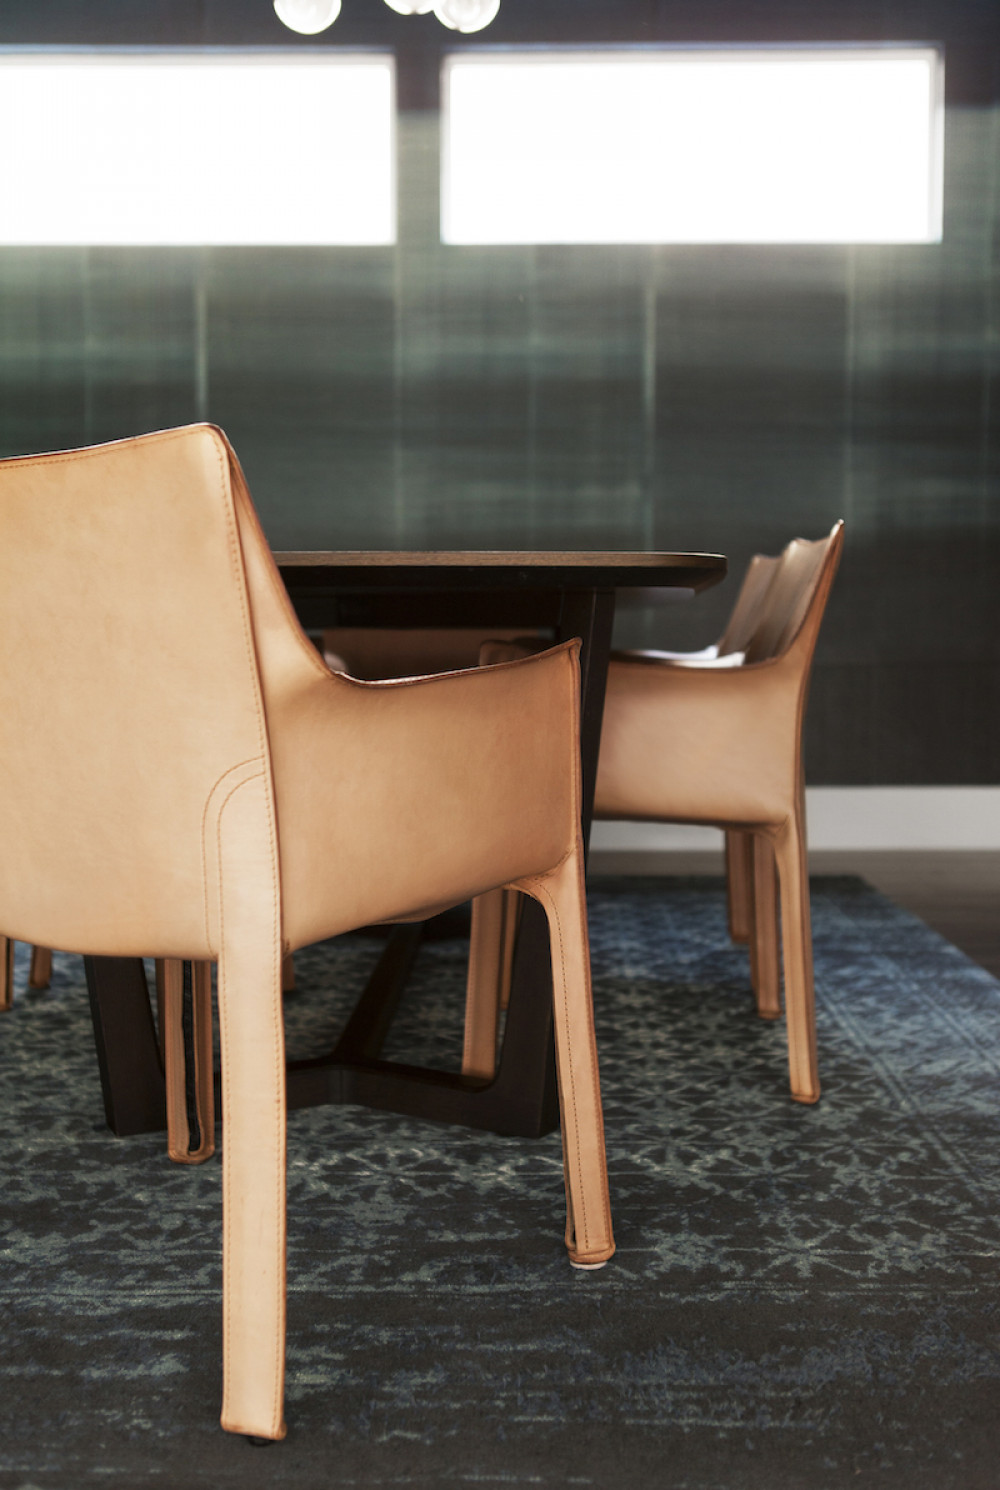 dining-chair-detail-light-brown-leather-area-rug